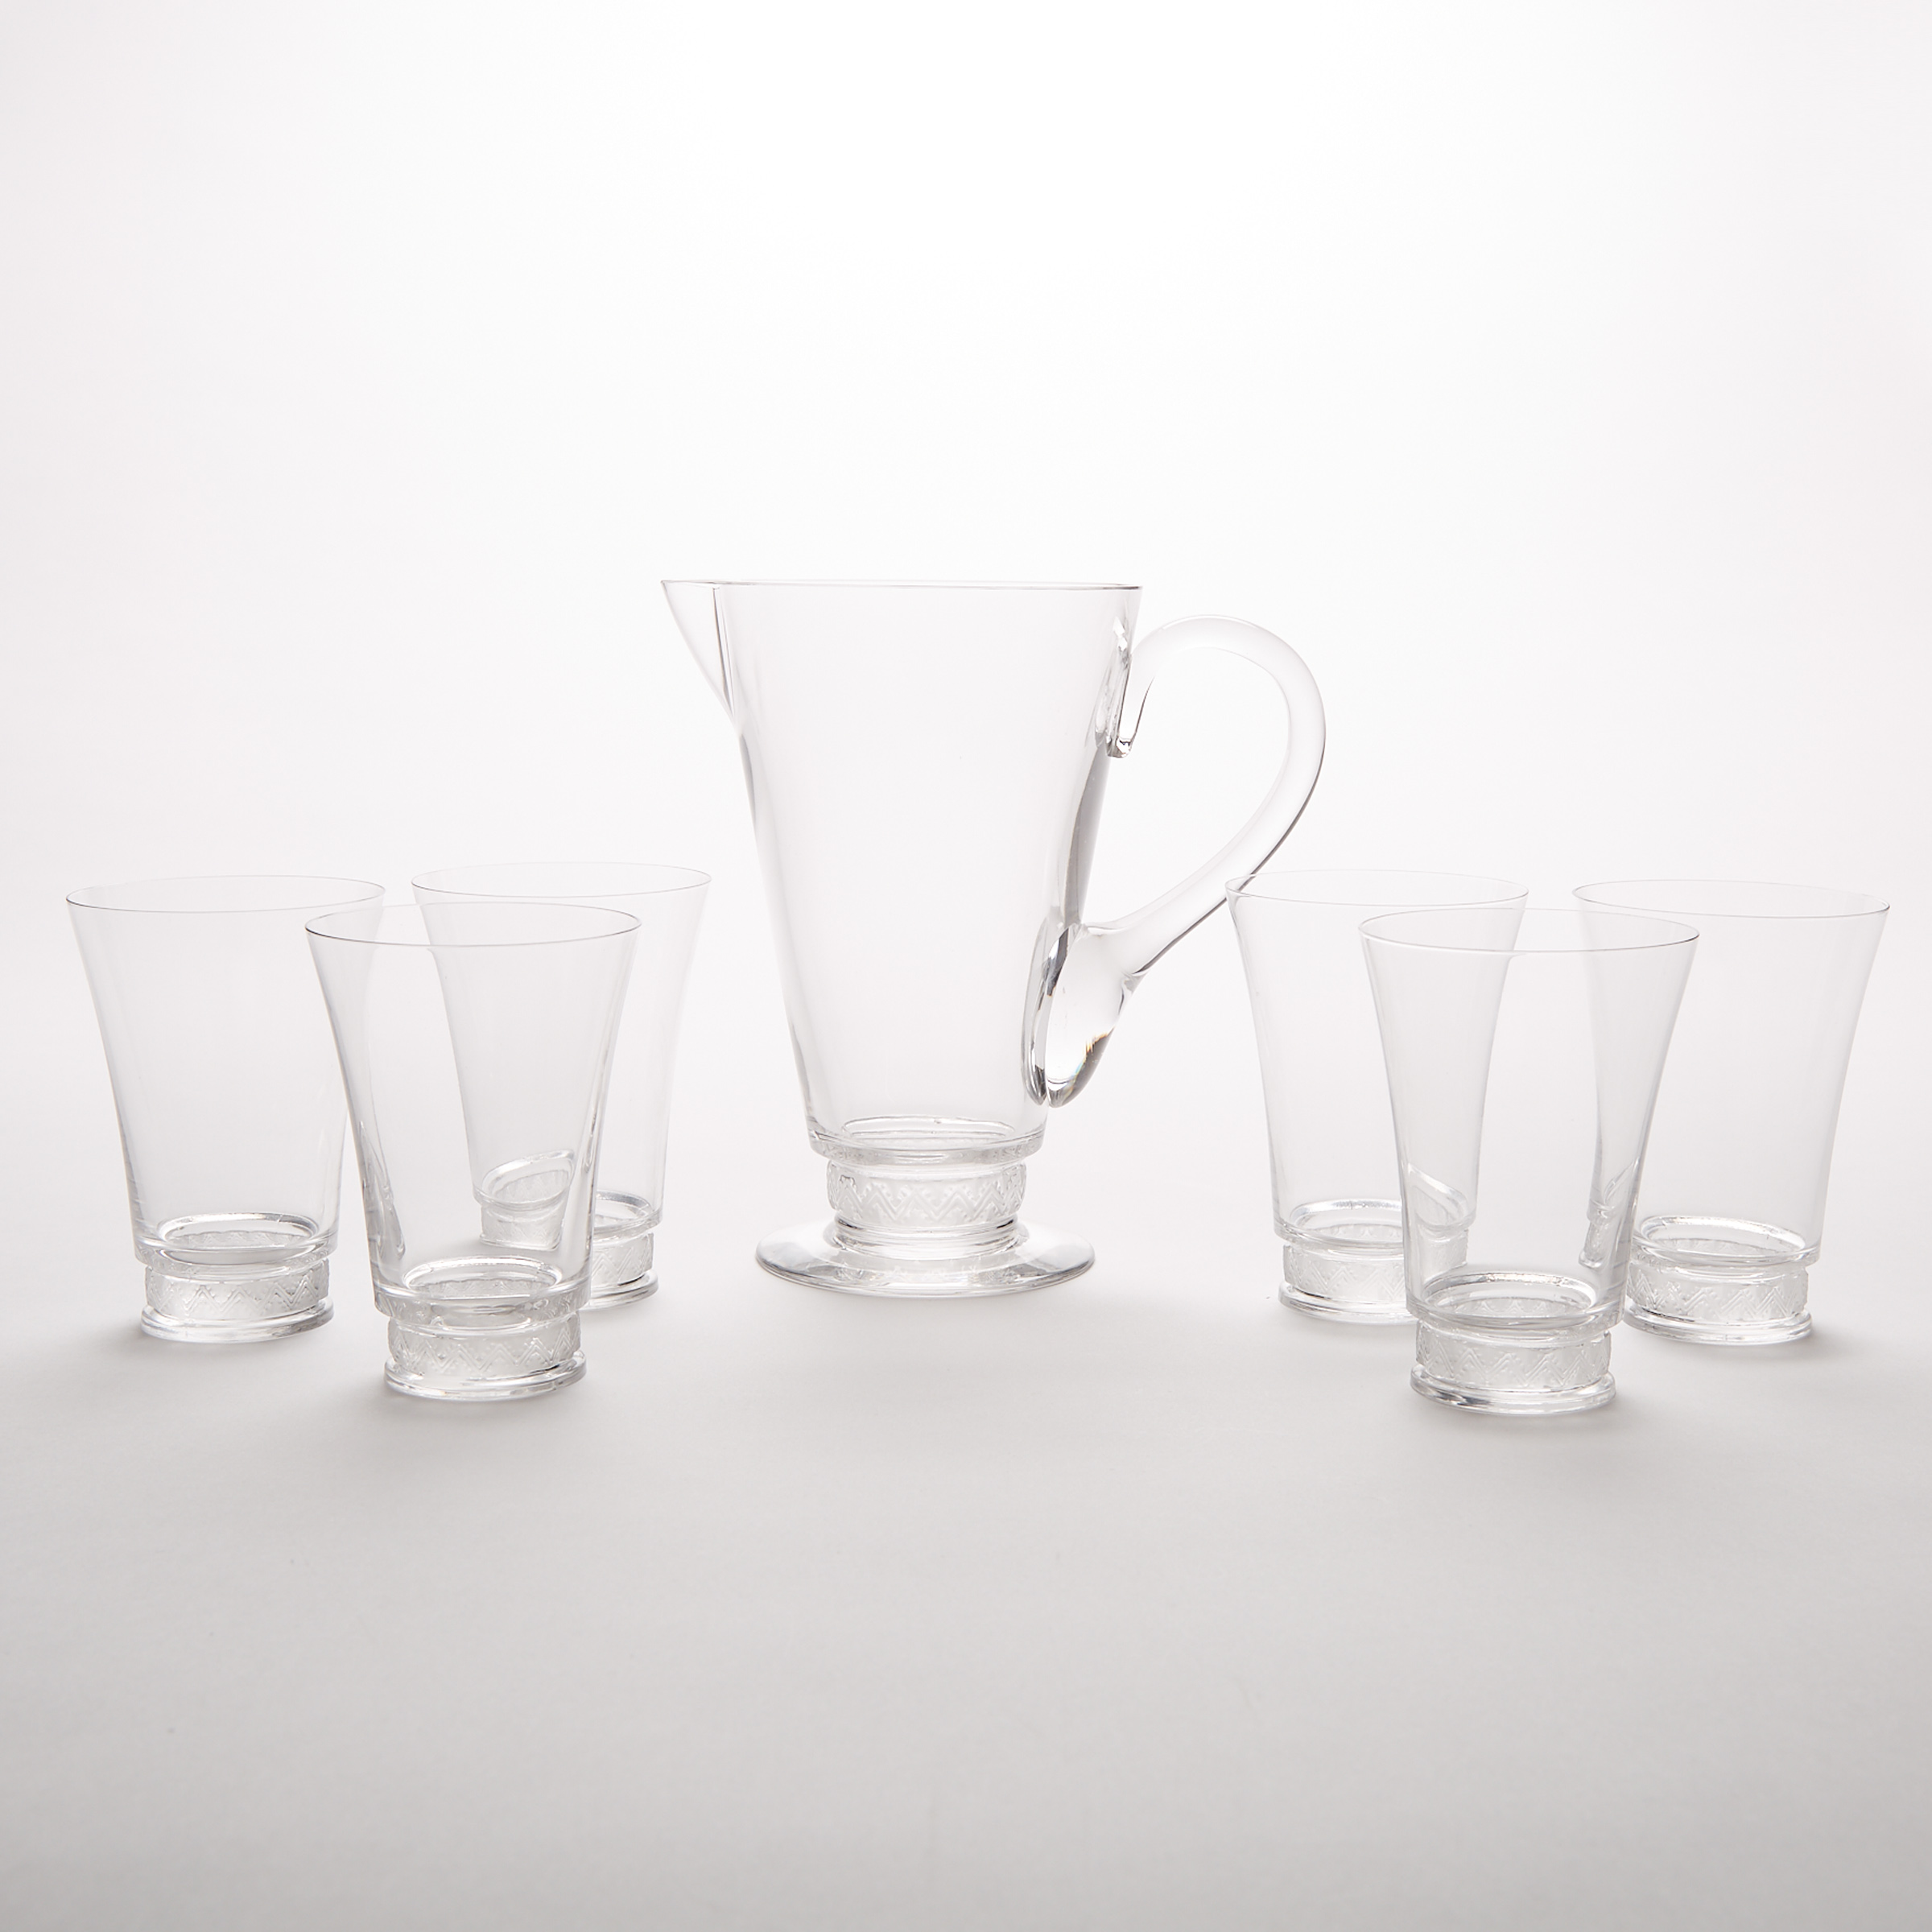 ‘Reims’, Lalique Glass Water Jug and Six Tumblers, post-1945